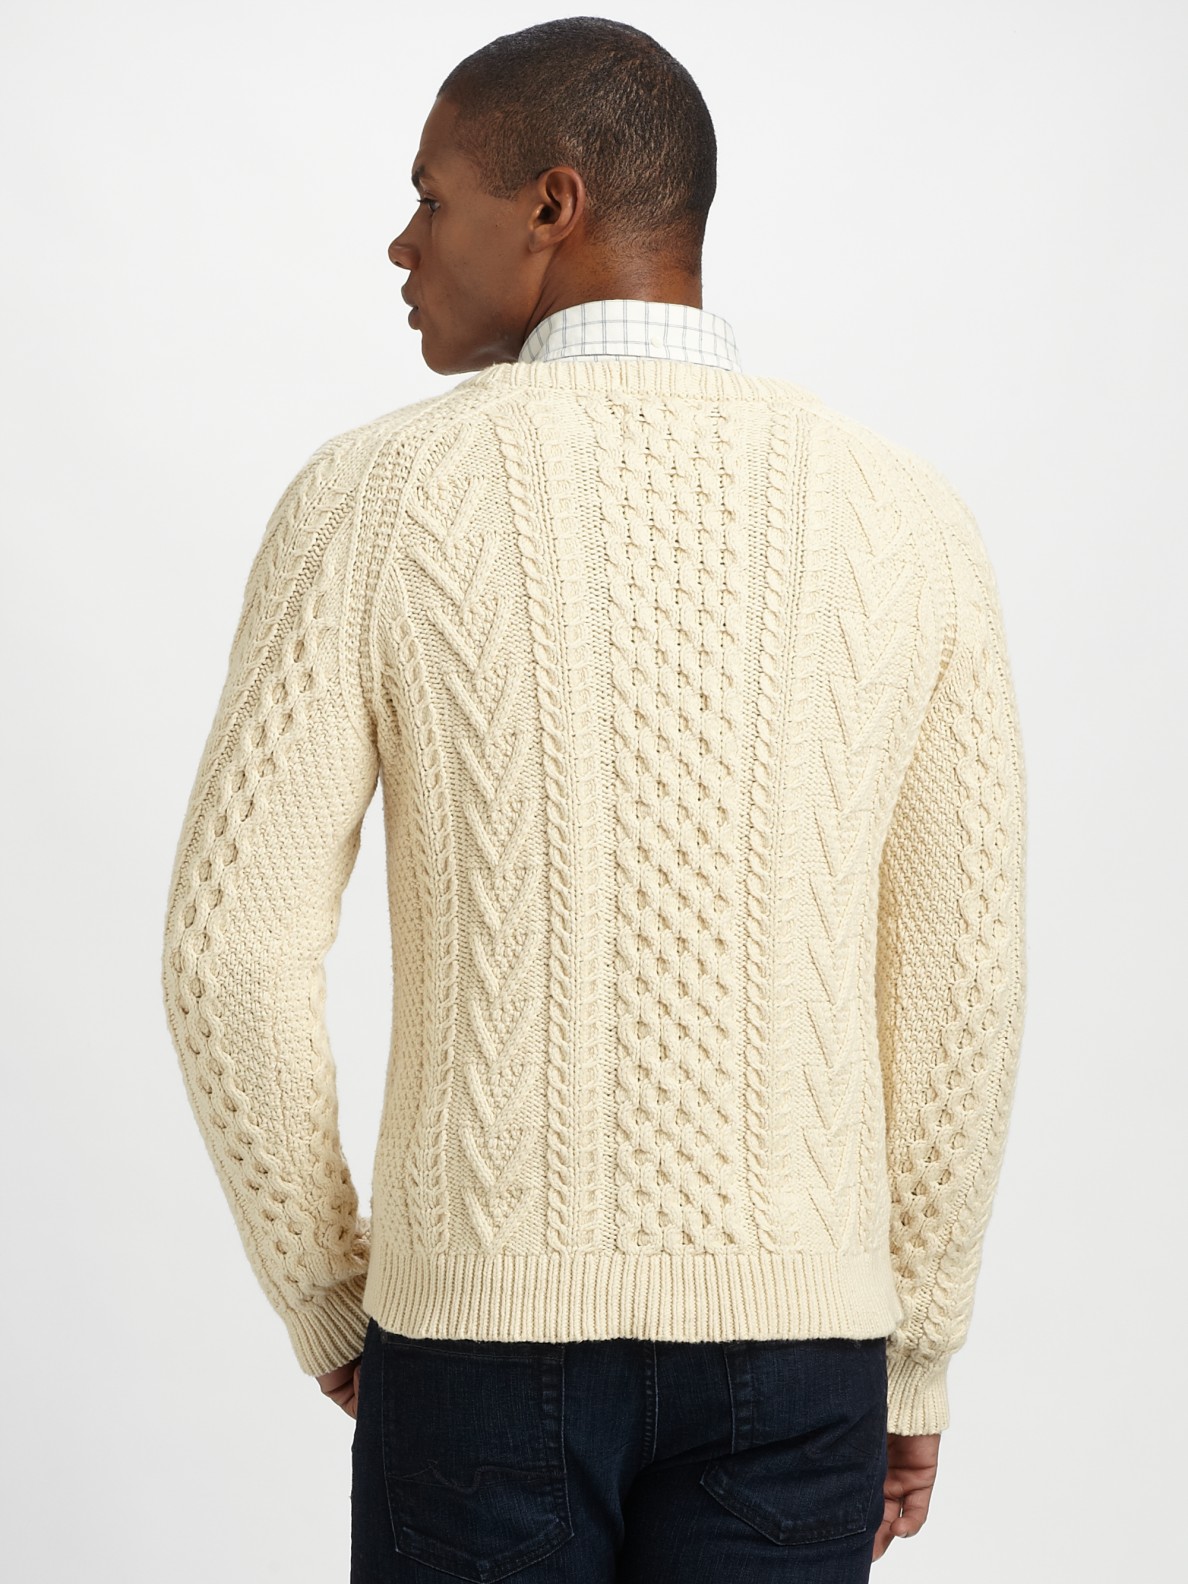 Gant rugger Classic Cable-Knit Sweater in Natural for Men | Lyst